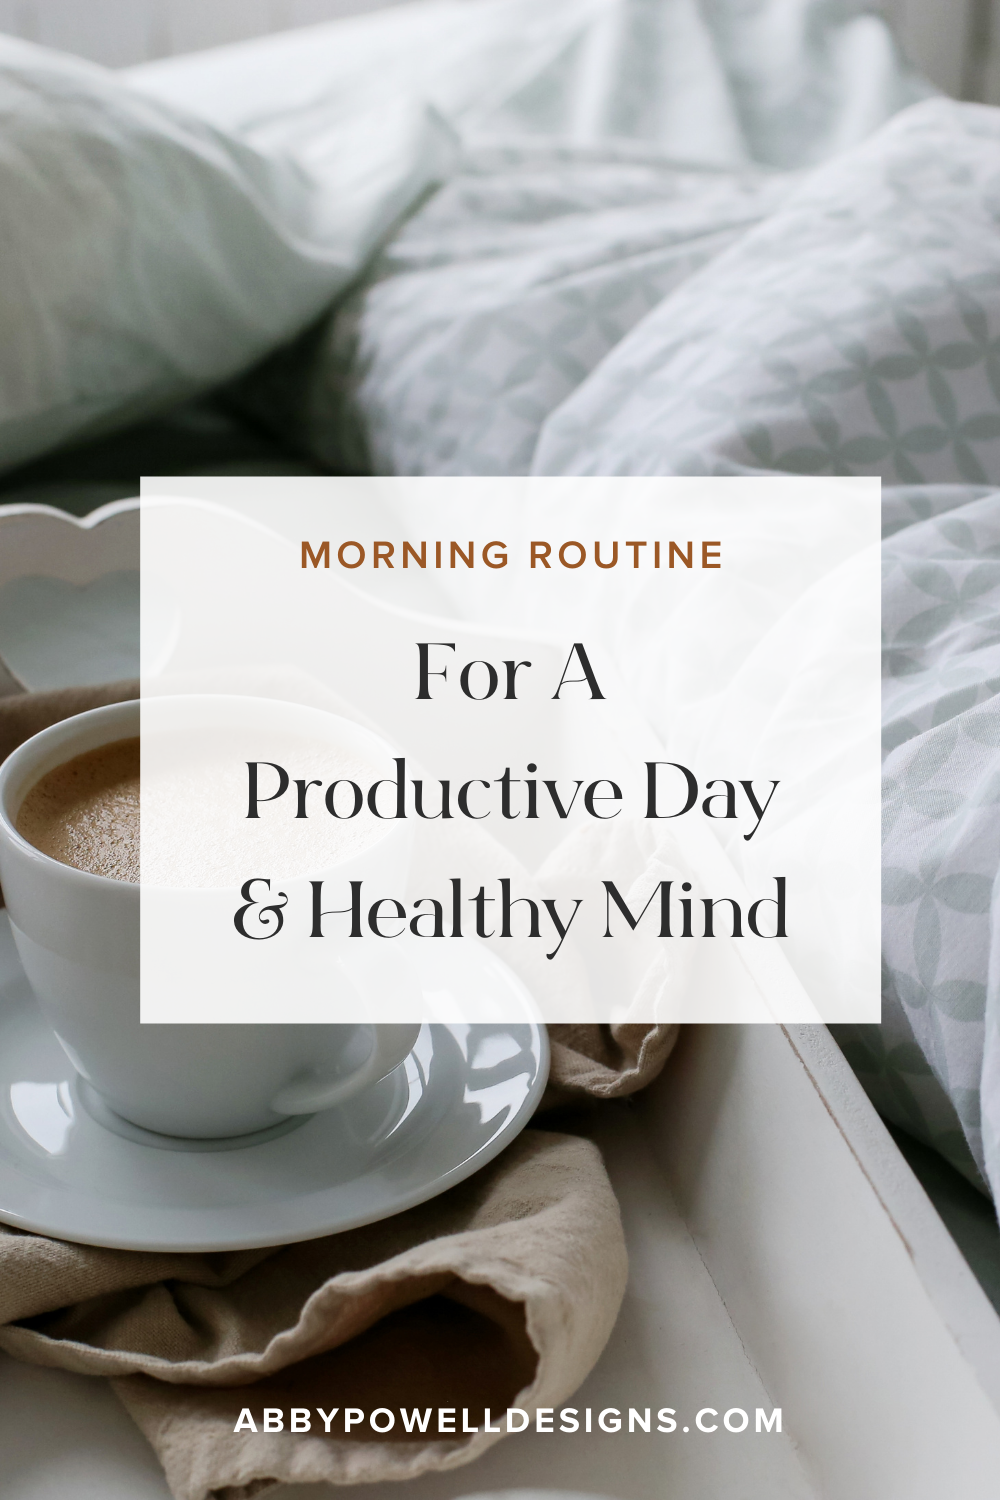 Healthy habits morning routine for a productive and successful day.